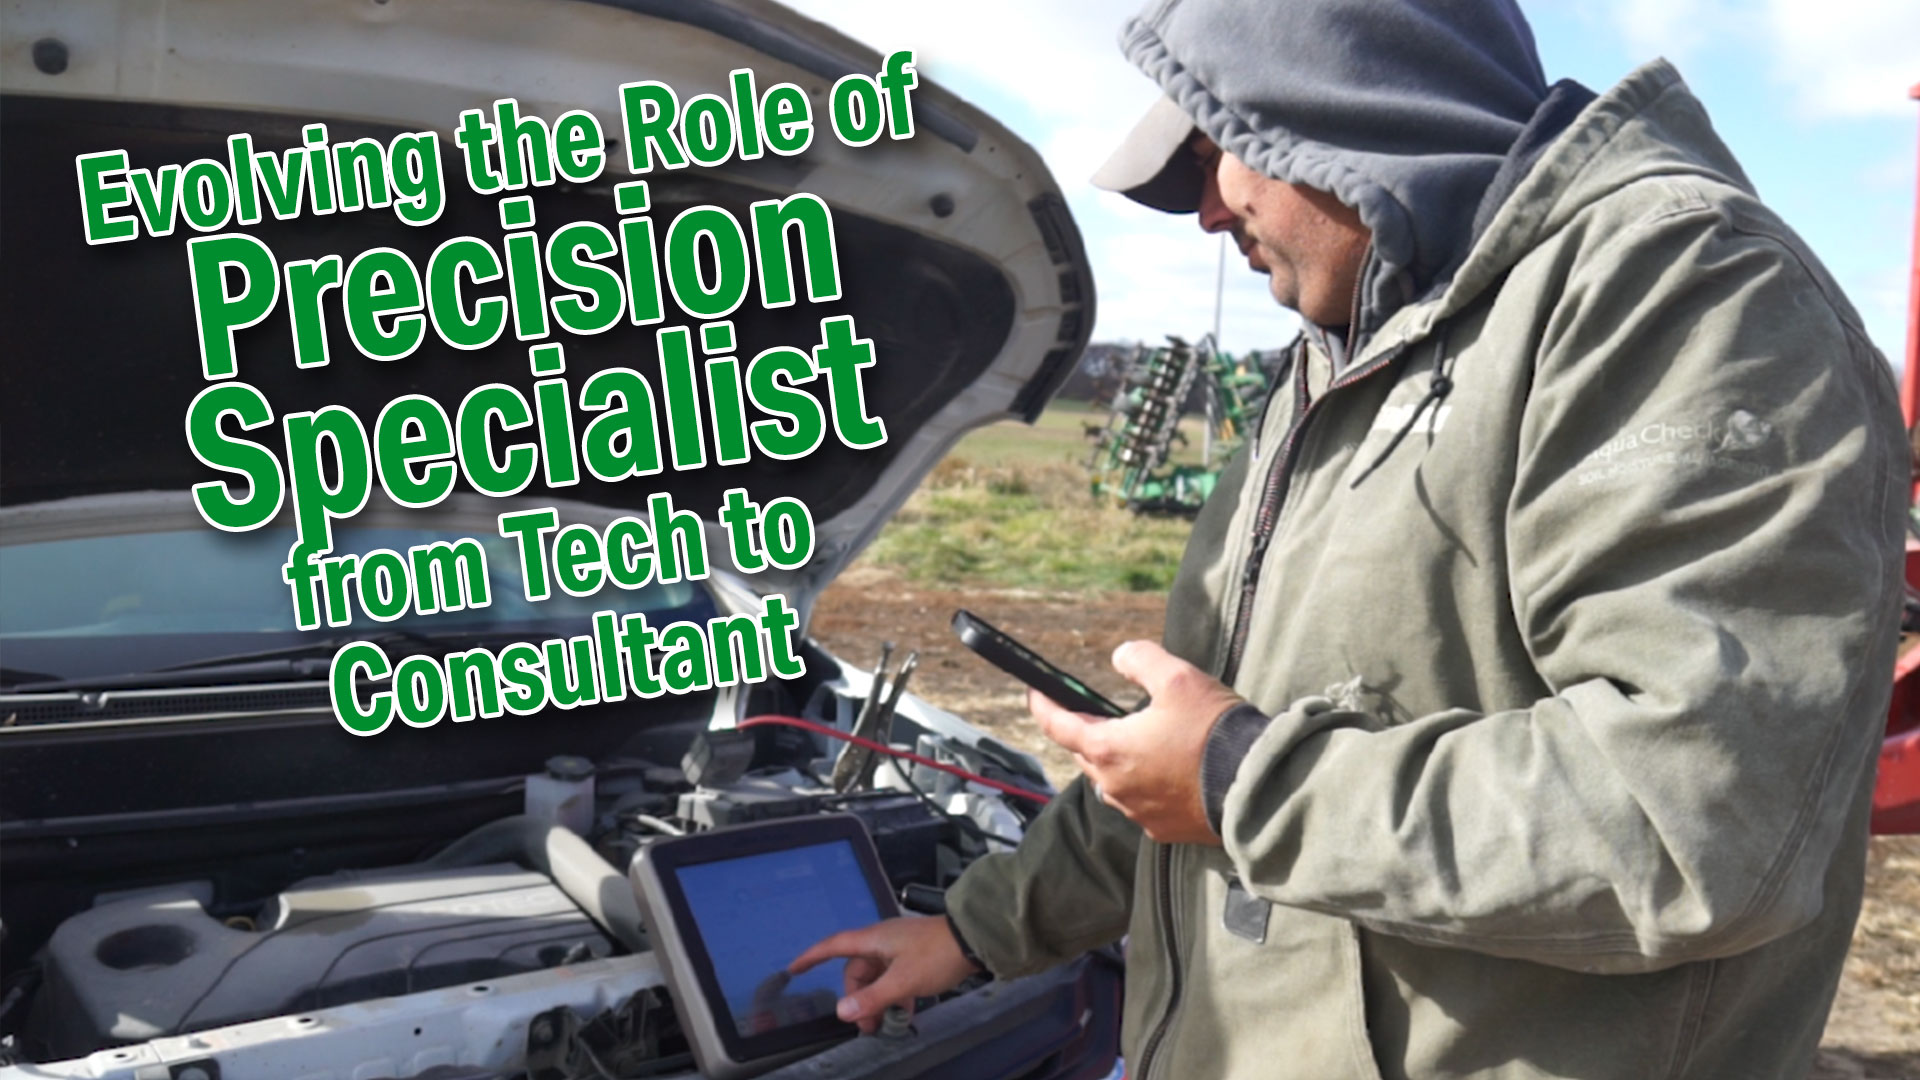 Evolving-the-Role-of-Precision-Specialist-from-Tech-to-Consultant.jpg